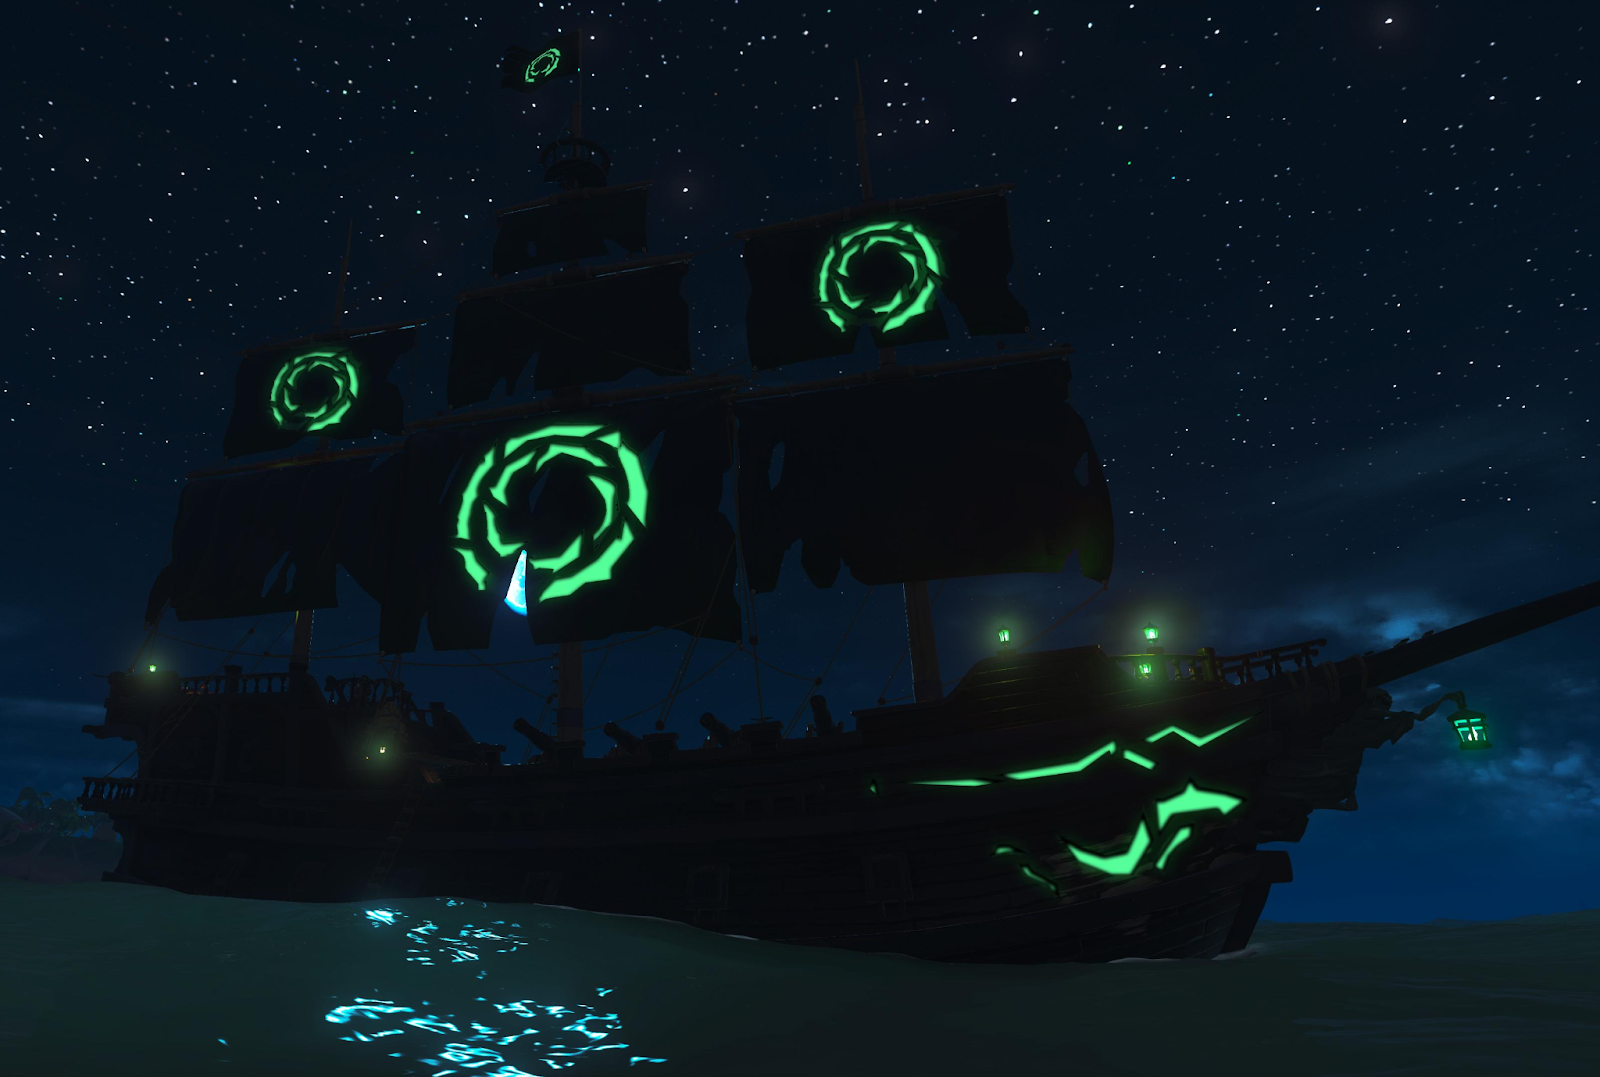 An image of the Ghost ship cosmetics from the game Sea of Thieves. 